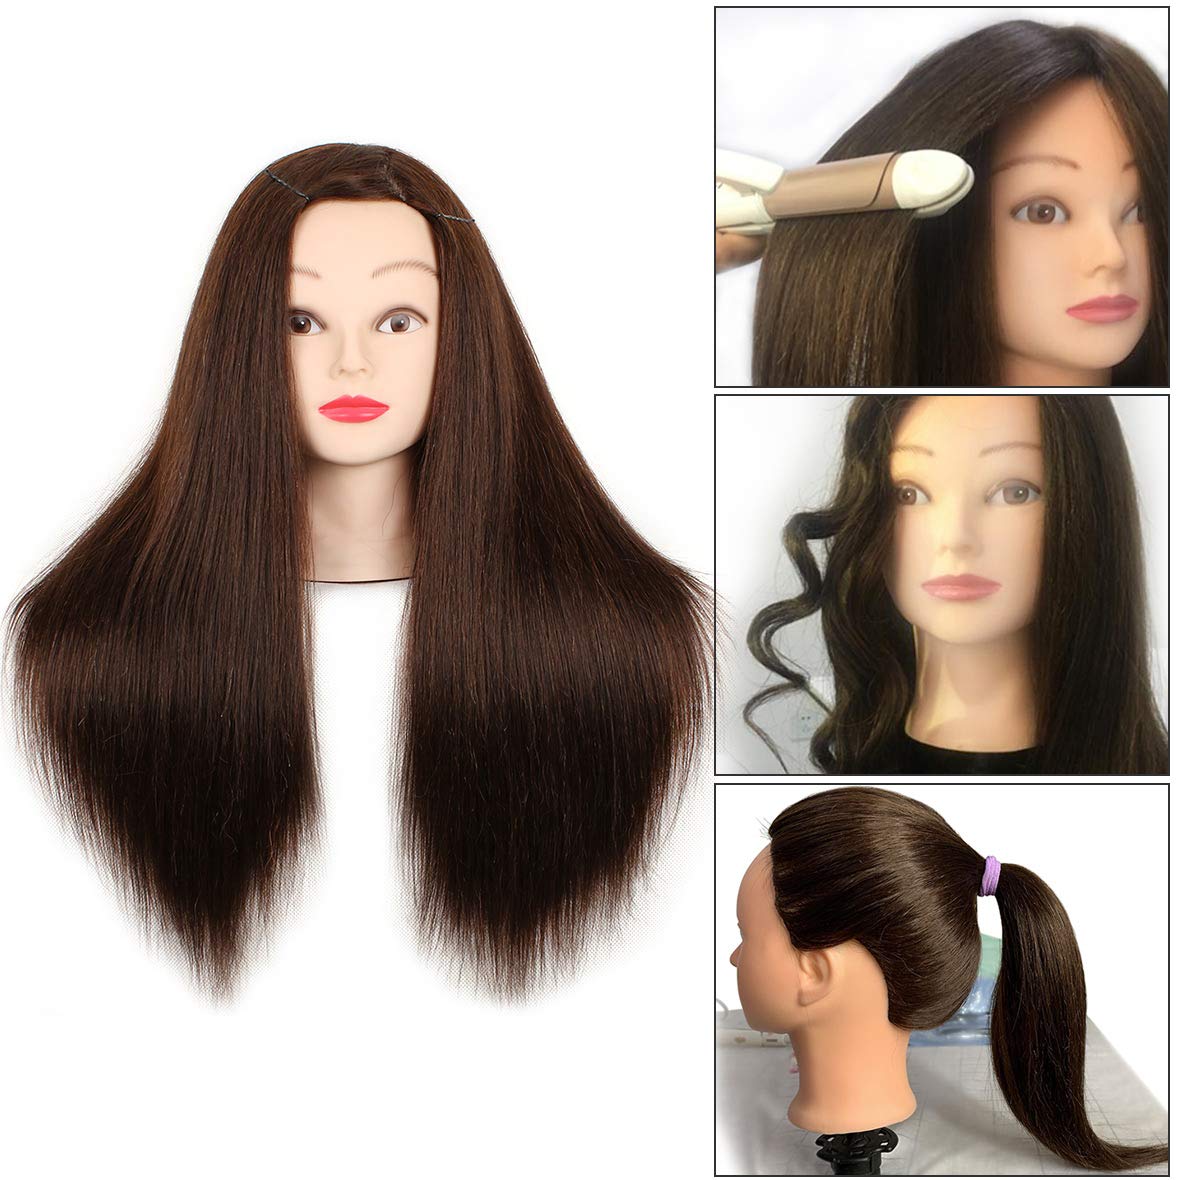 Training Head with Human Hair - 20-22inch Cosmetology Mannequin Head with  100% Real Human Hair for Braiding Practice Cutting - Manikin Head with  Human